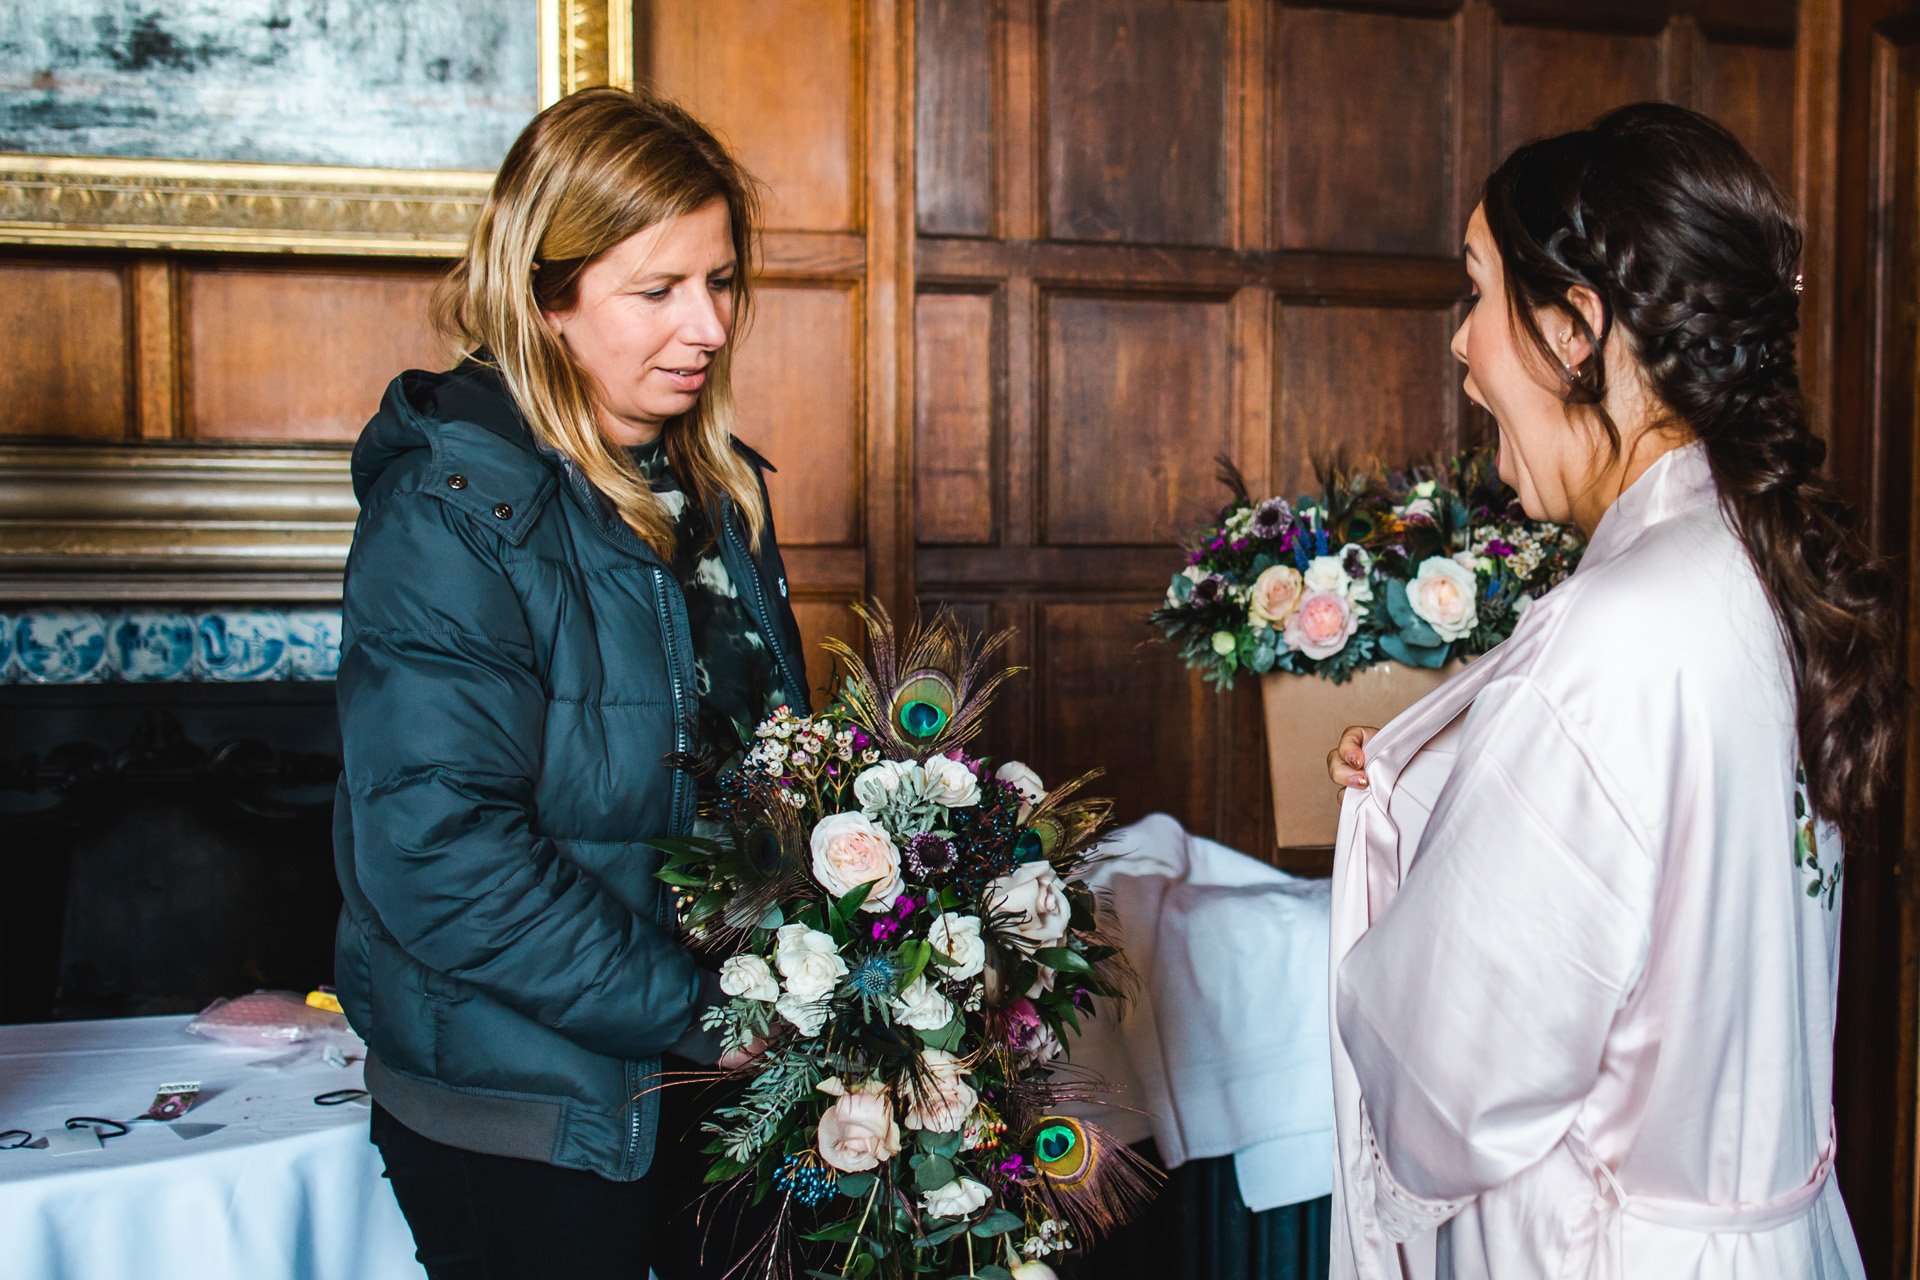 Sorori design wedding florist showing the bride her beautiful bouquet for the first time